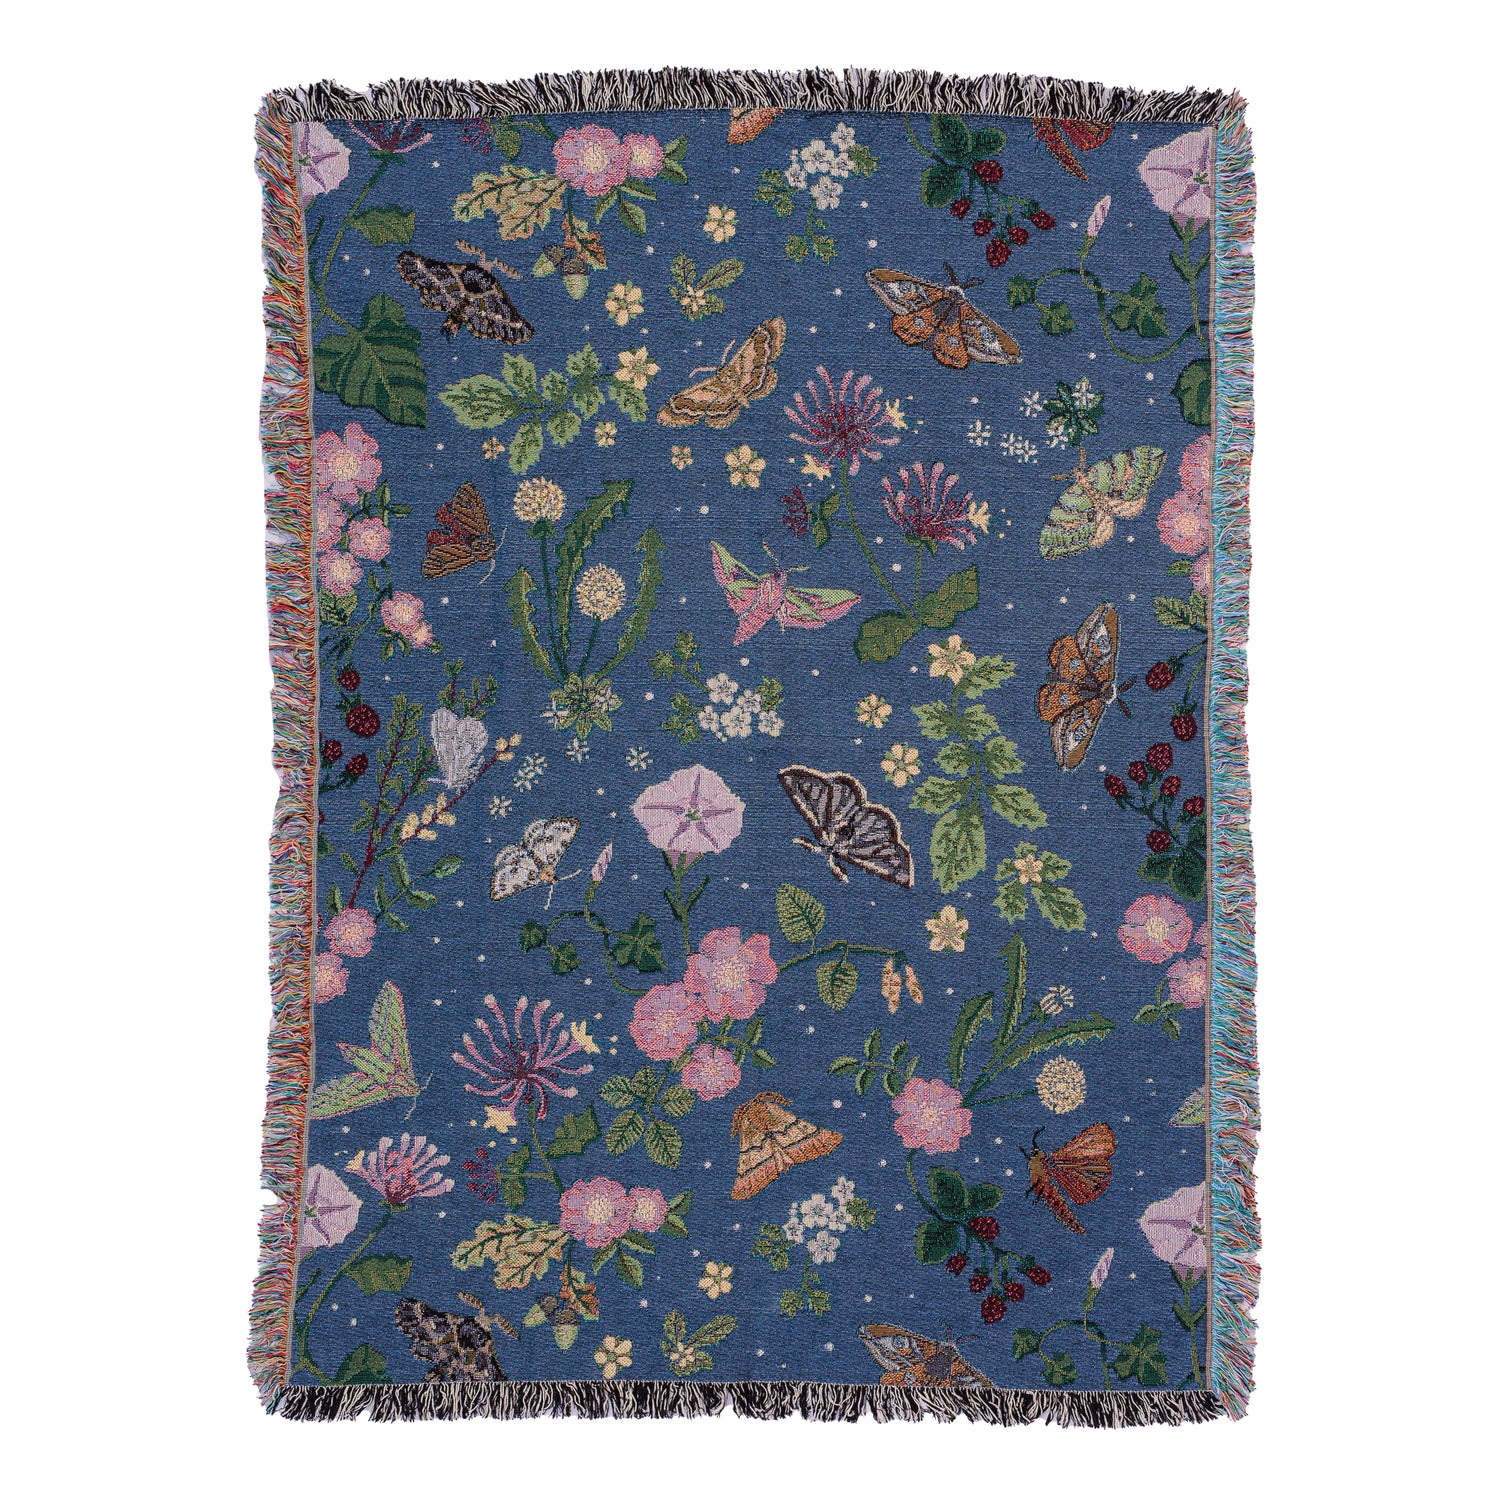 small dark blue woven wrap blanket with delicate moth and flower pattern 